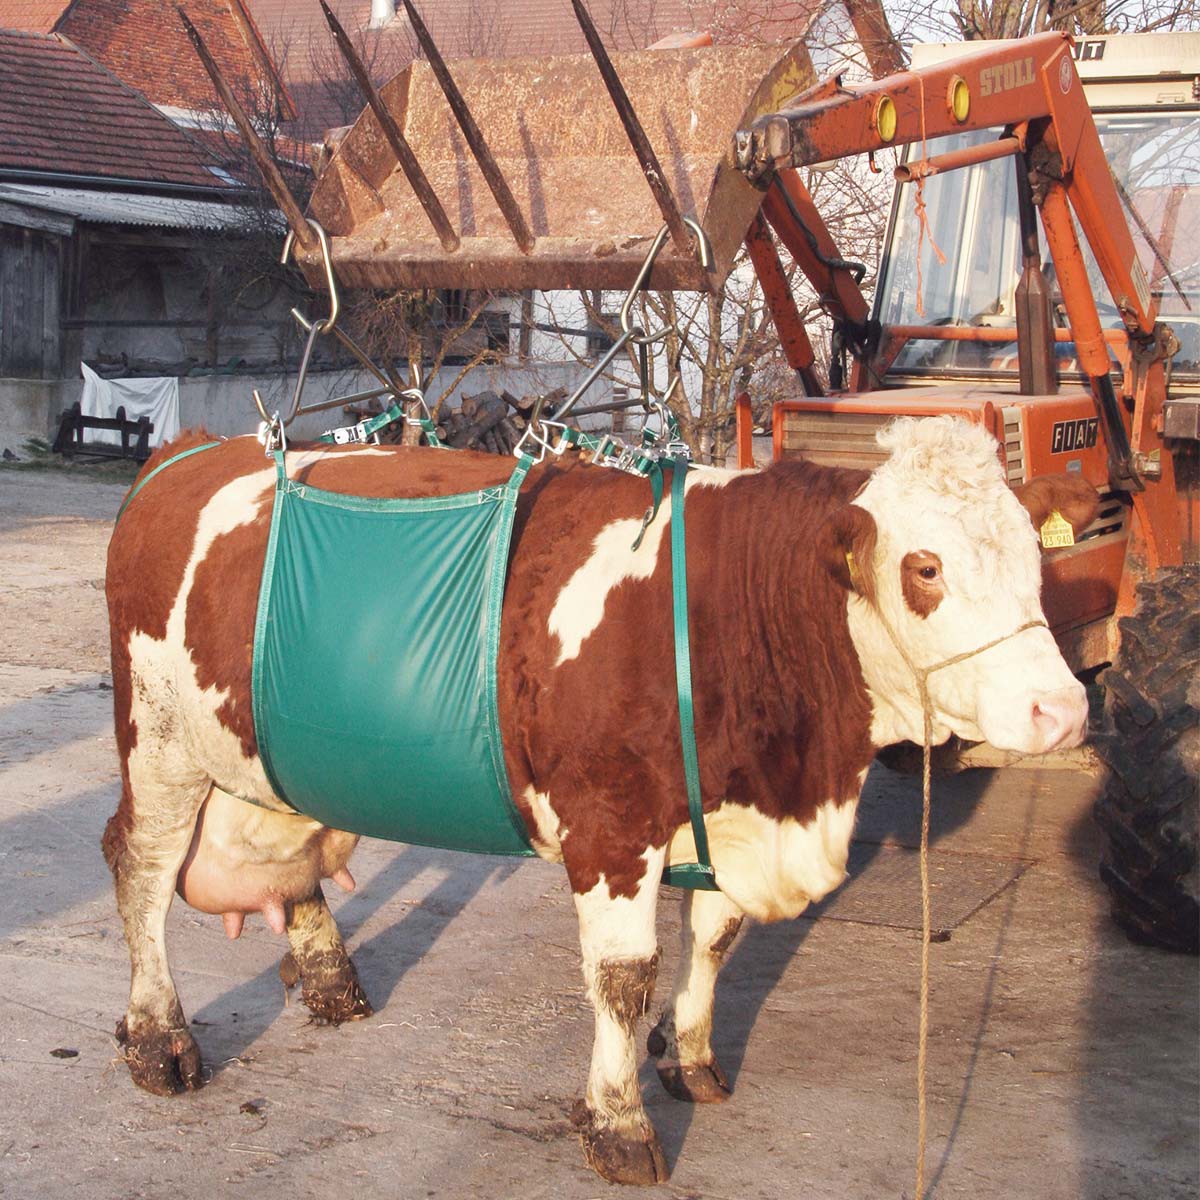 Cow lifting device